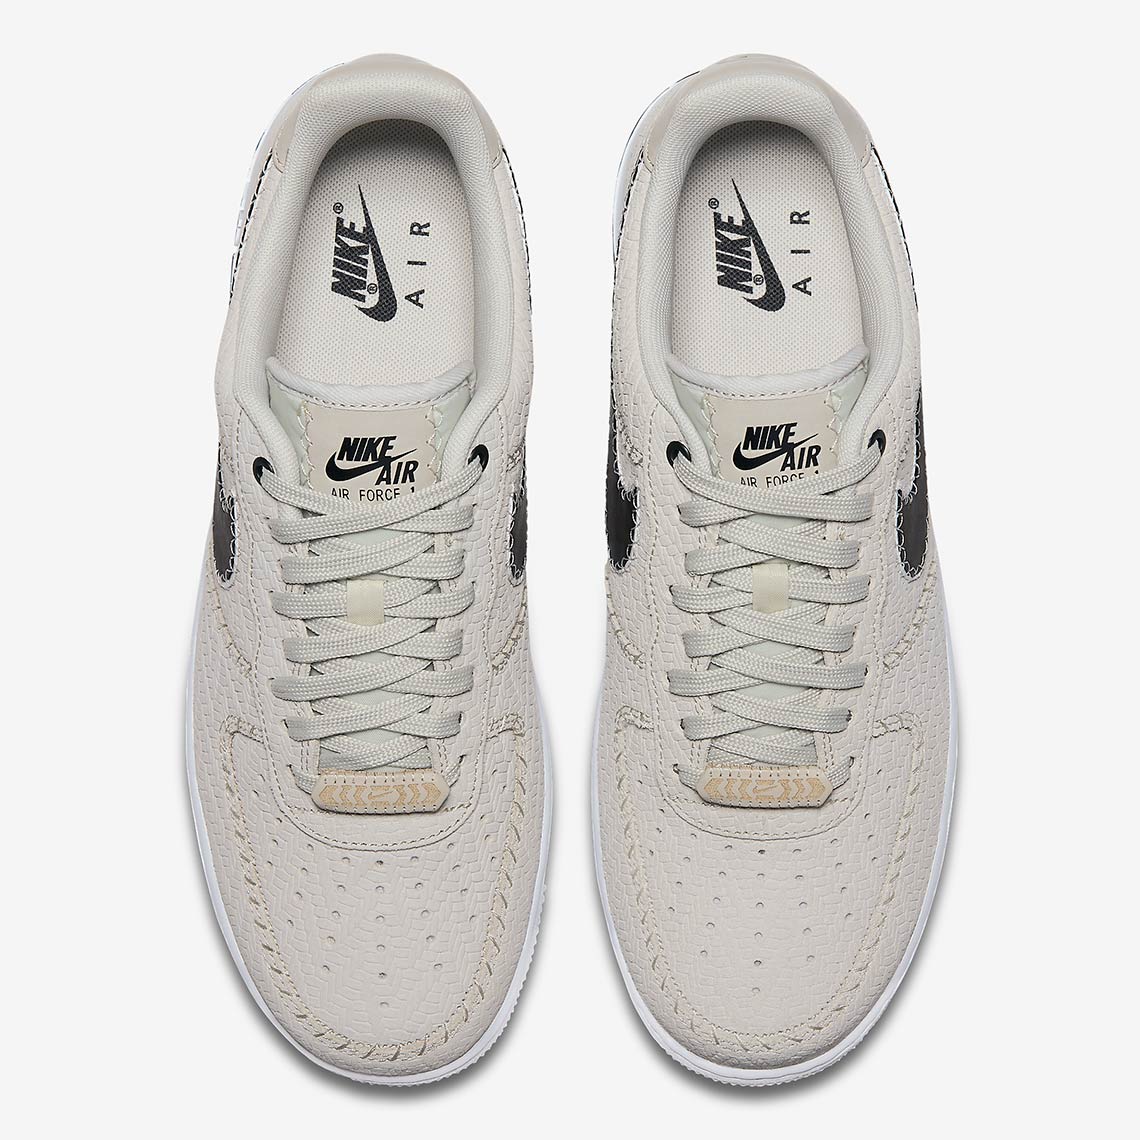 Nike N7 Air Force 1 Low Release Info AO2369-001 | SneakerNews.com